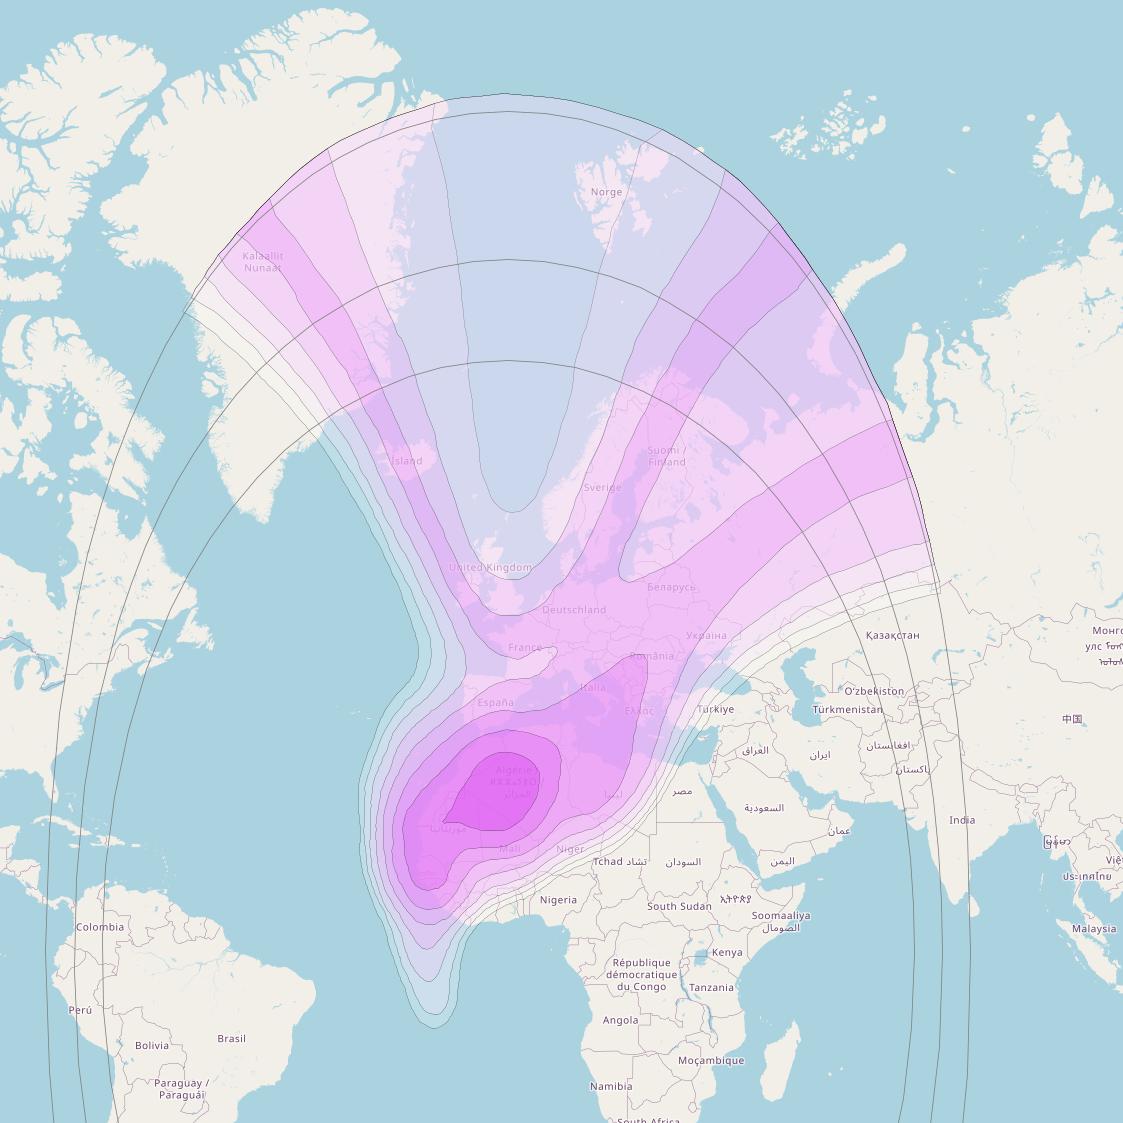 Intelsat 10-02 at 1° W downlink C-band North East Zone Beam coverage map